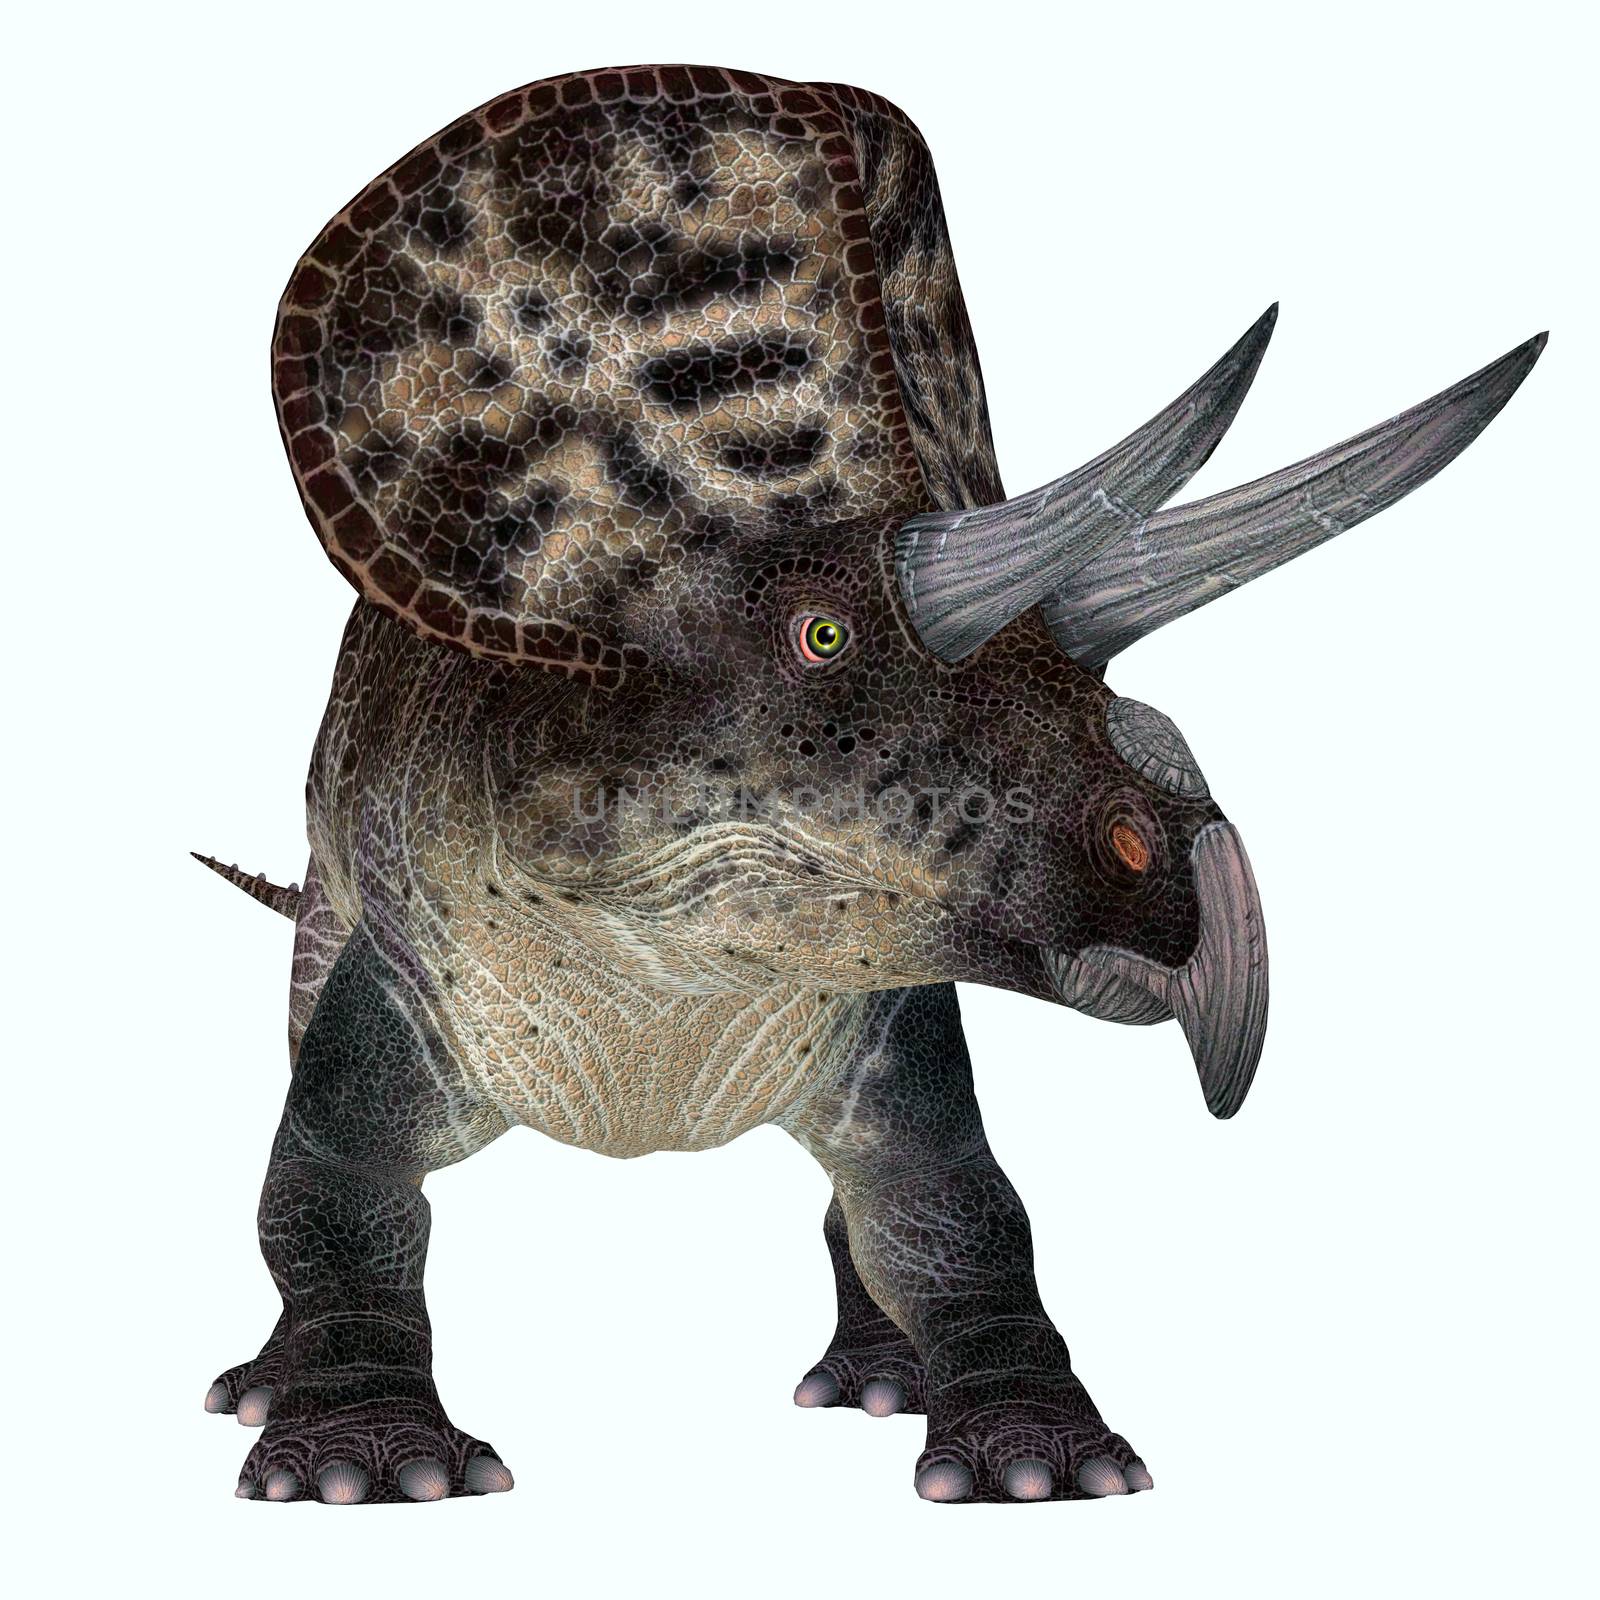 Zuniceratops was a herbivorous Ceratopsian dinosaur that lived in New Mexico, United States during the Cretaceous Period.